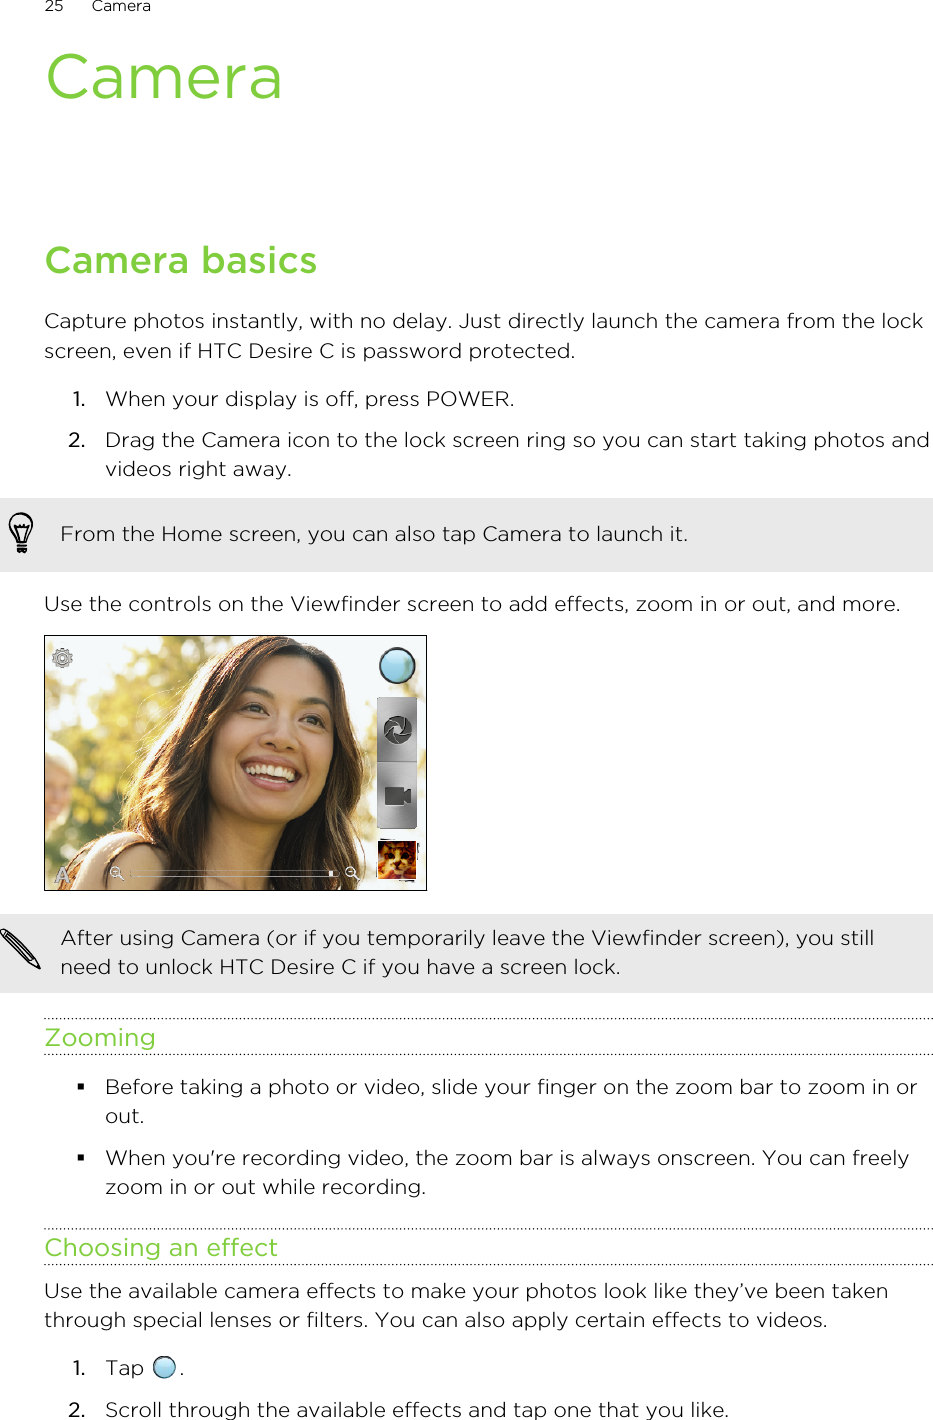 CameraCamera basicsCapture photos instantly, with no delay. Just directly launch the camera from the lockscreen, even if HTC Desire C is password protected.1. When your display is off, press POWER.2. Drag the Camera icon to the lock screen ring so you can start taking photos andvideos right away. From the Home screen, you can also tap Camera to launch it.Use the controls on the Viewfinder screen to add effects, zoom in or out, and more.After using Camera (or if you temporarily leave the Viewfinder screen), you stillneed to unlock HTC Desire C if you have a screen lock.Zooming§Before taking a photo or video, slide your finger on the zoom bar to zoom in orout.§When you&apos;re recording video, the zoom bar is always onscreen. You can freelyzoom in or out while recording.Choosing an effectUse the available camera effects to make your photos look like they’ve been takenthrough special lenses or filters. You can also apply certain effects to videos.1. Tap  .2. Scroll through the available effects and tap one that you like.25 Camera